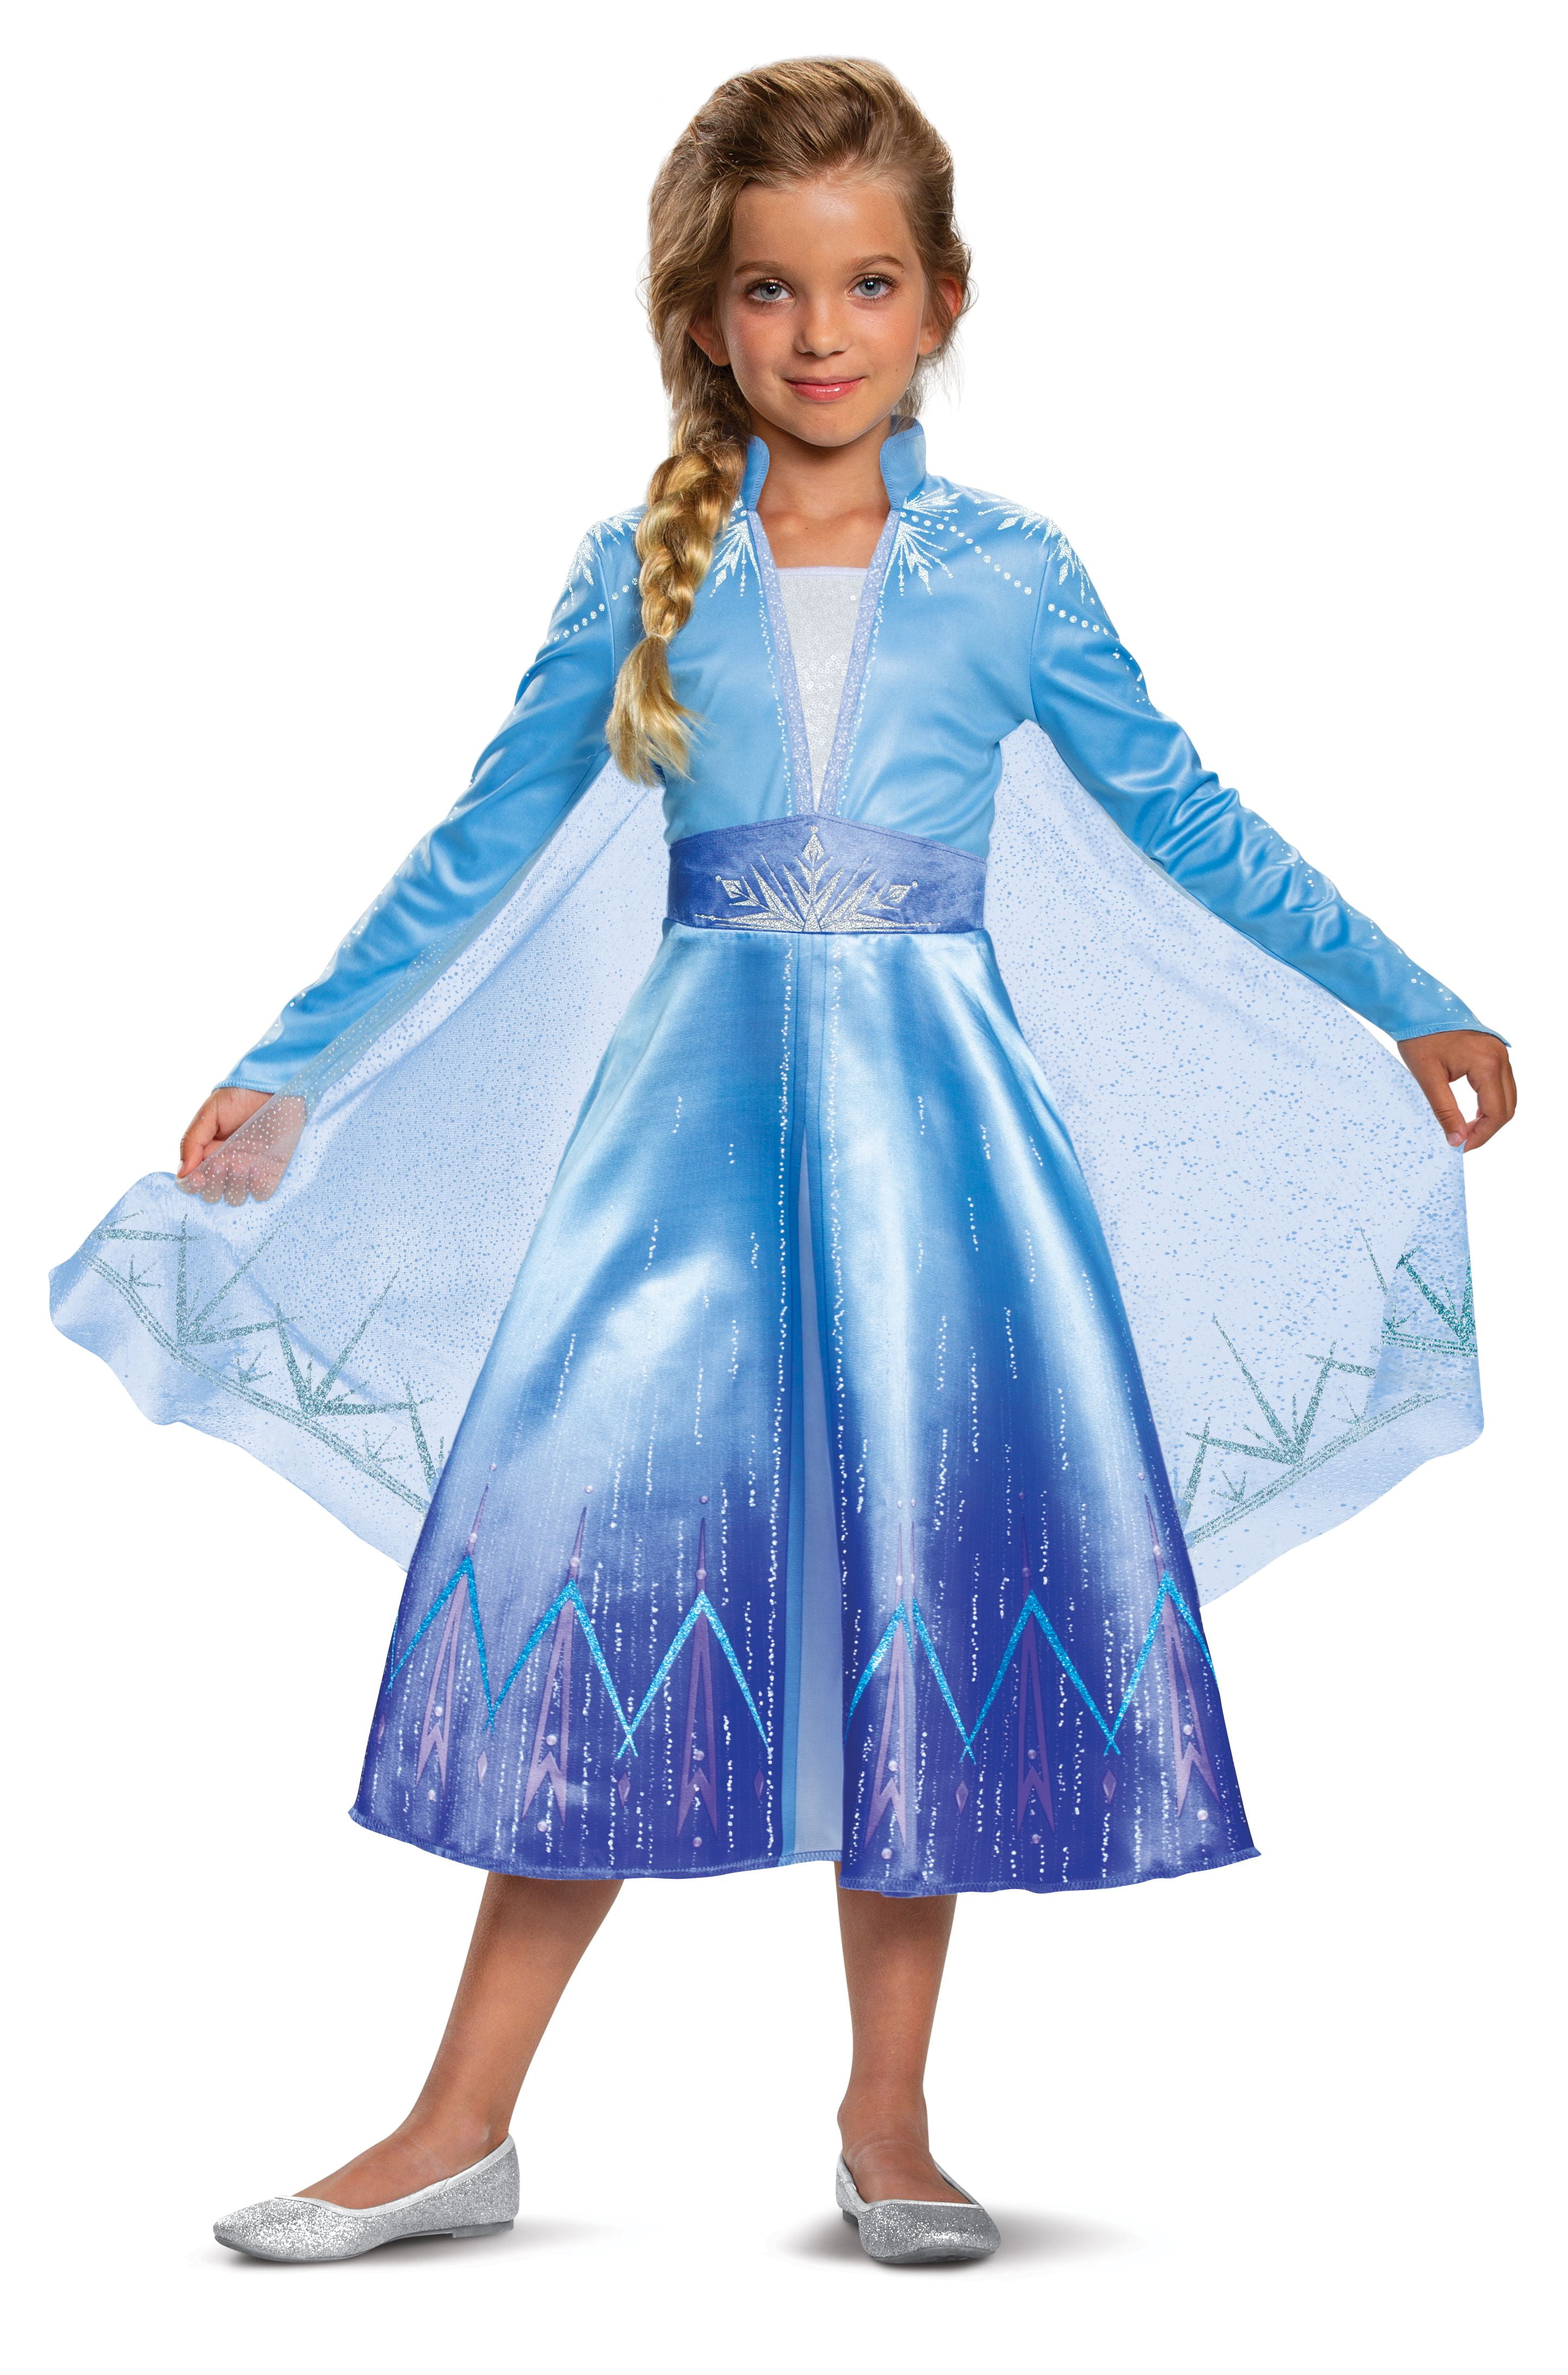 Kids Girls Frozen2 Queen Elsa Anna Cosplay Outfit Party Fancy Dress Age 4-10Y 